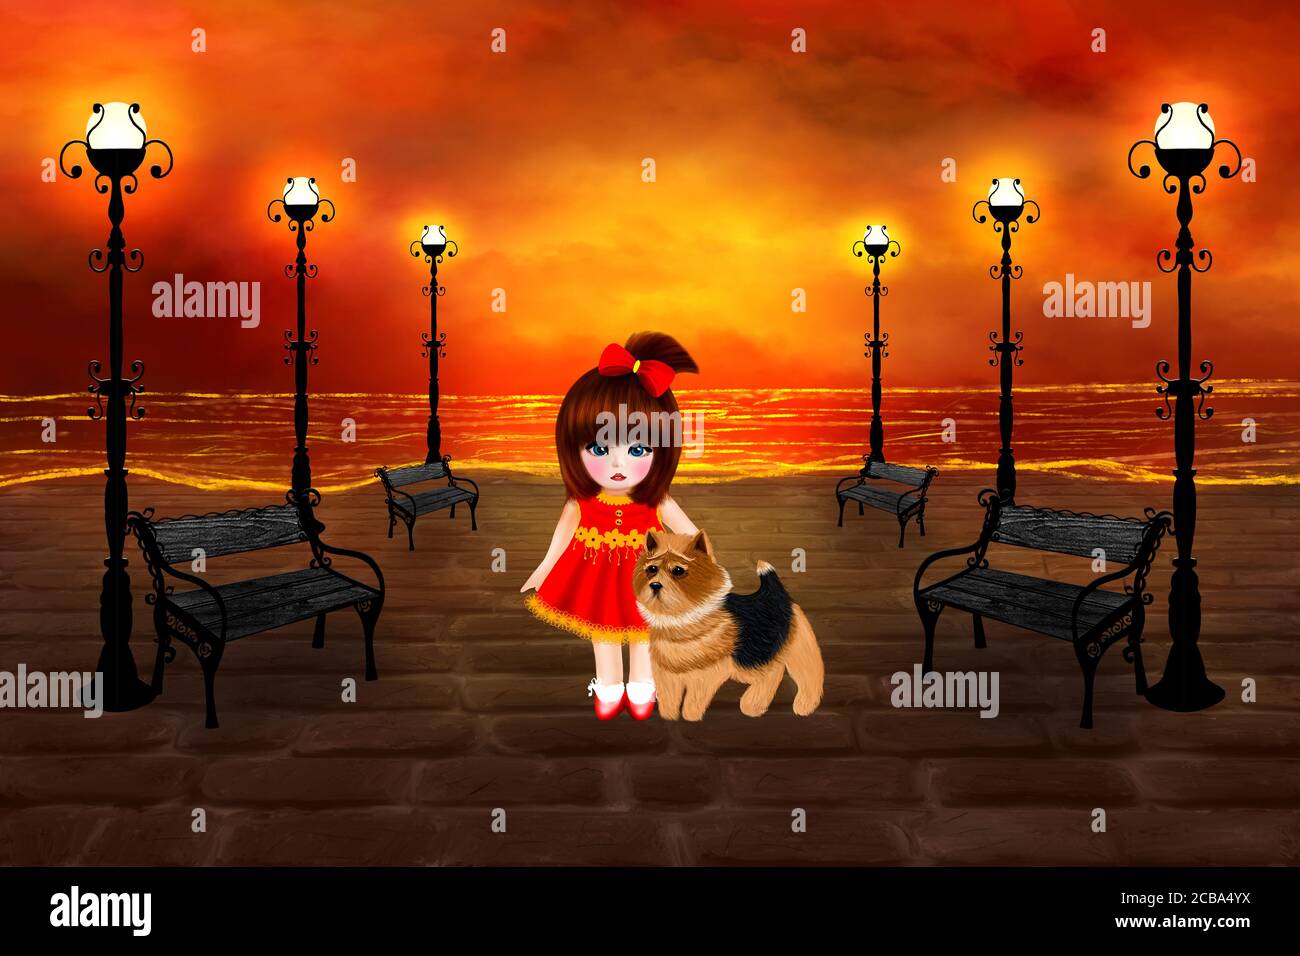 Little girl in a red dress walks with a dog along the evening embankment. Digital artwork. Stock Photo